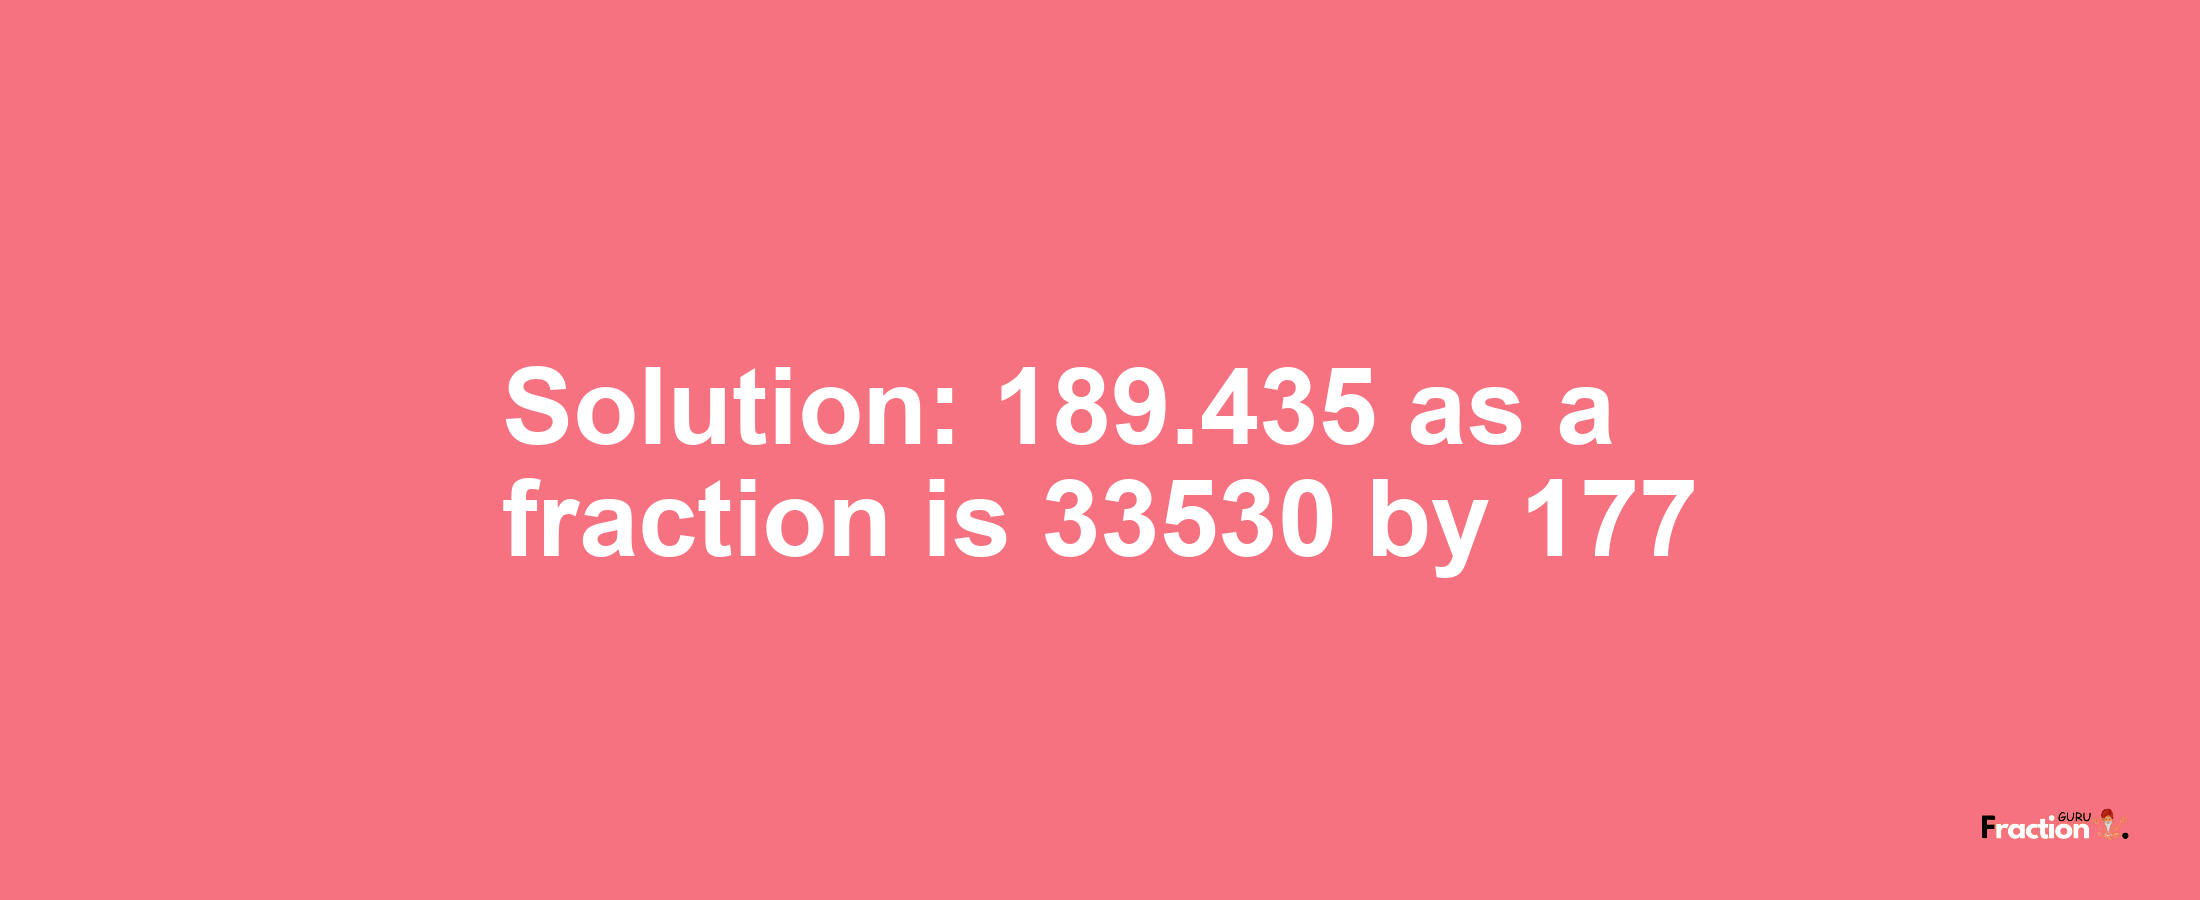 Solution:189.435 as a fraction is 33530/177